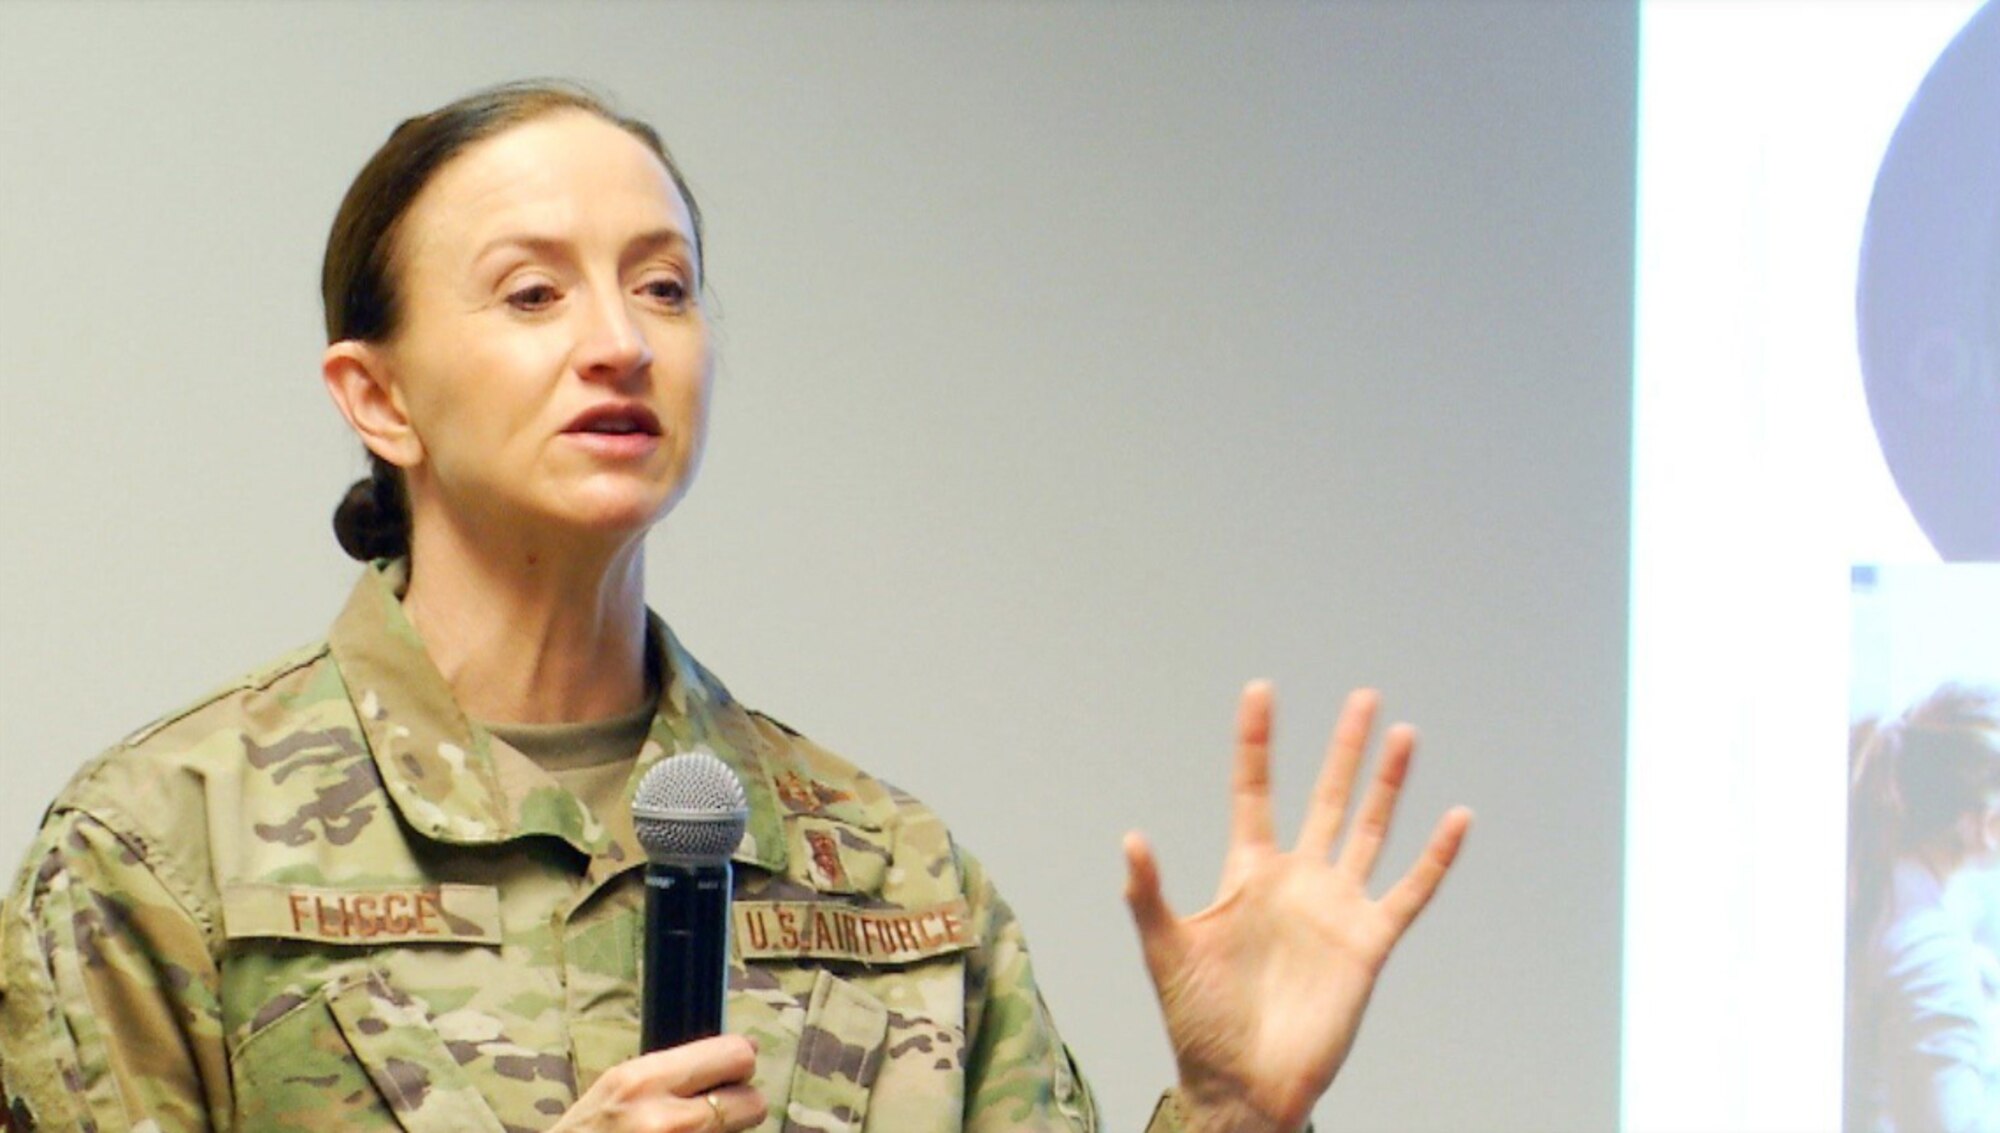 Image of an Airman giving a presentation.